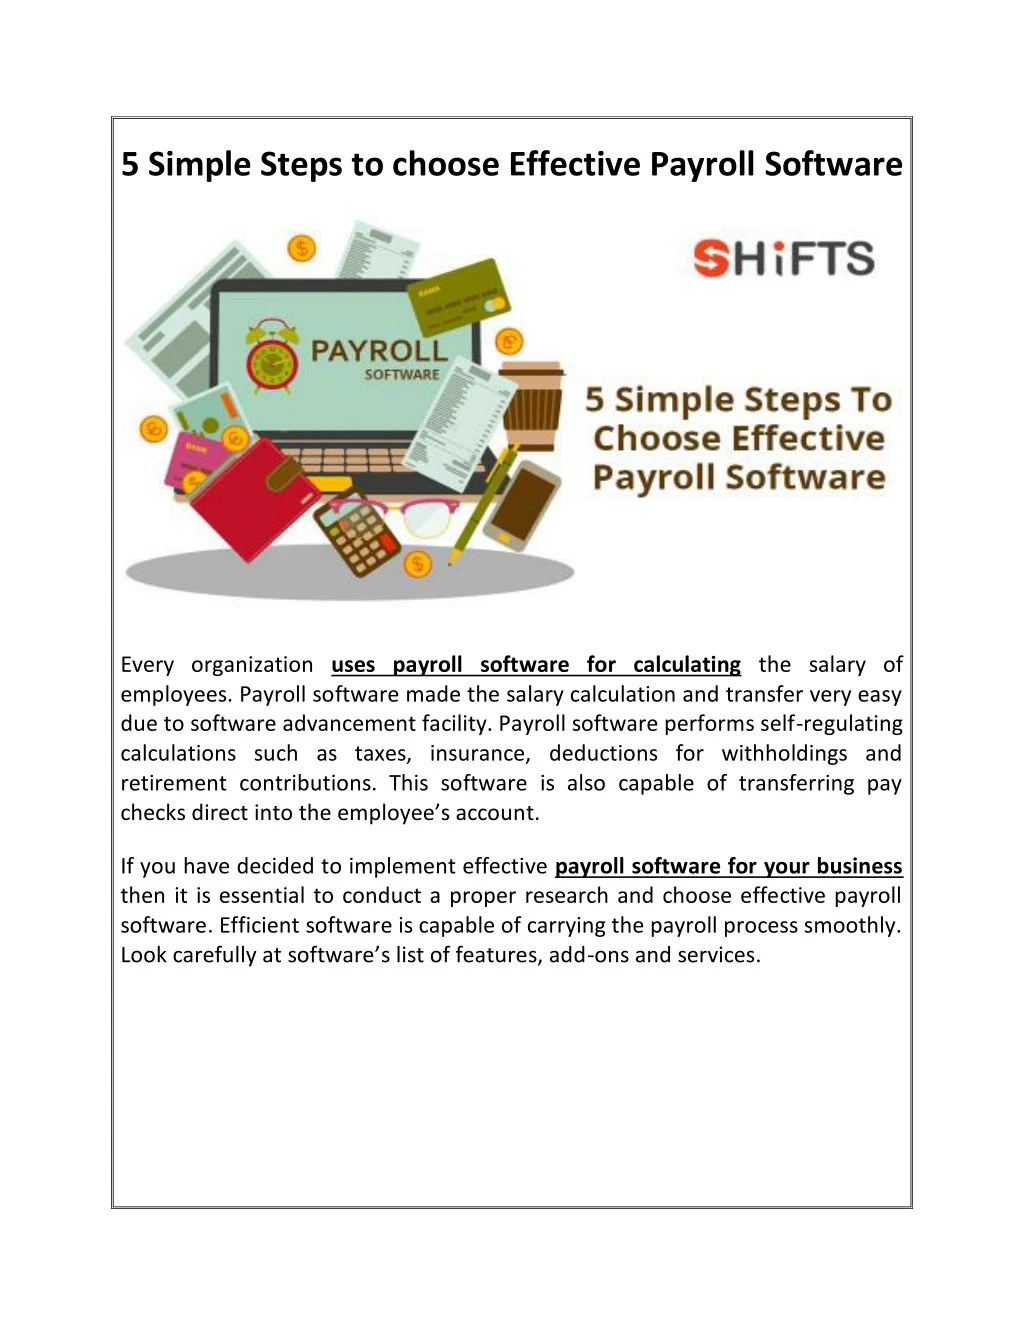 5 simple steps to choose effective payroll